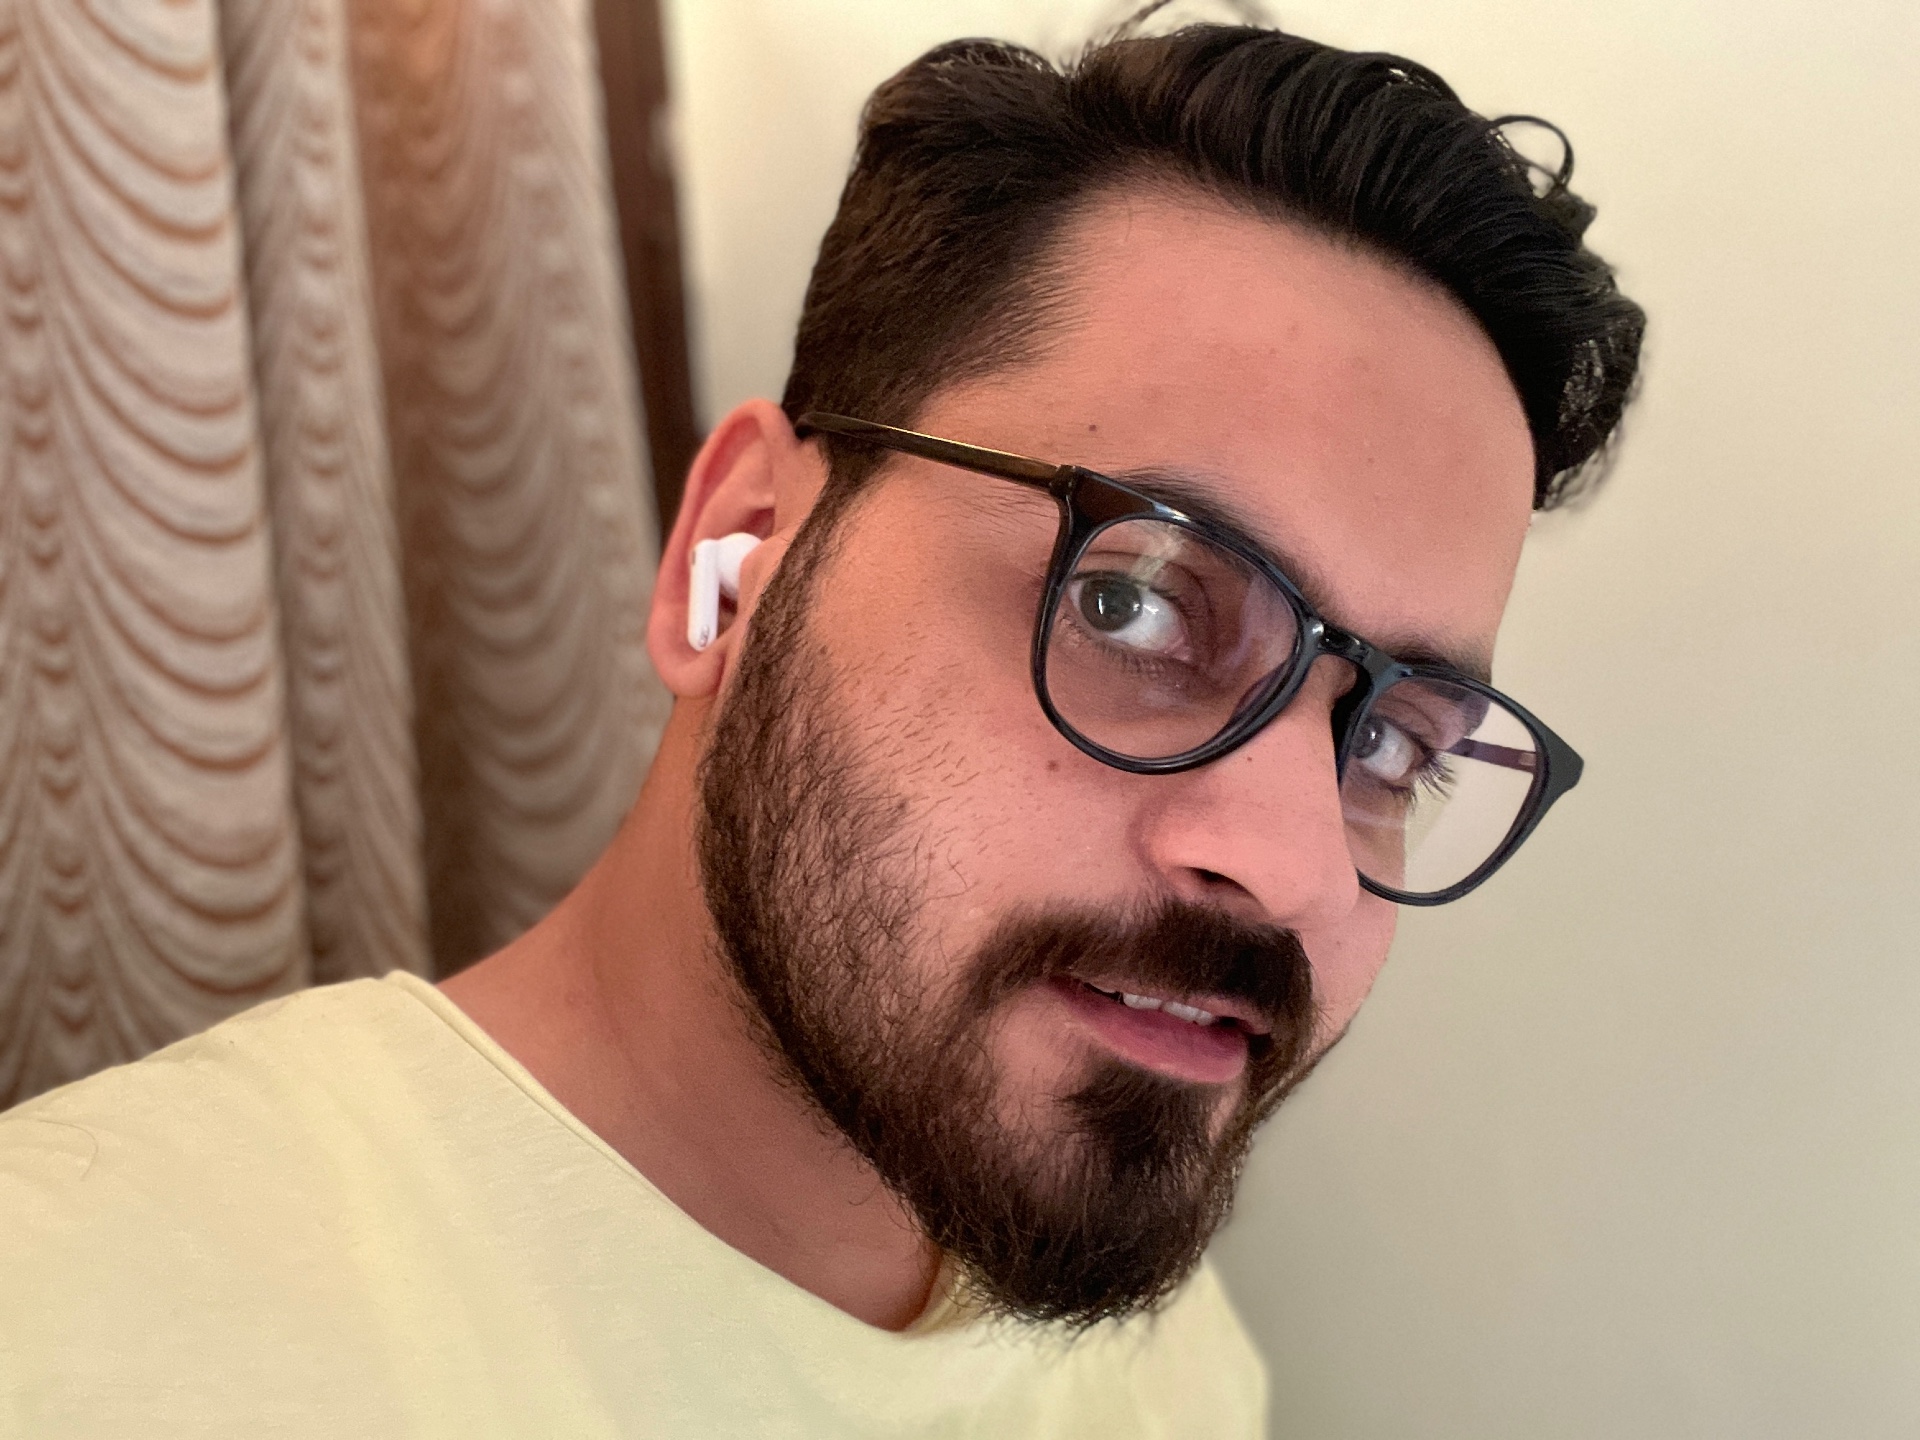 OPPO Enco X2 With Active Noise Cancellation Bluetooth Headset ( In the Ear )